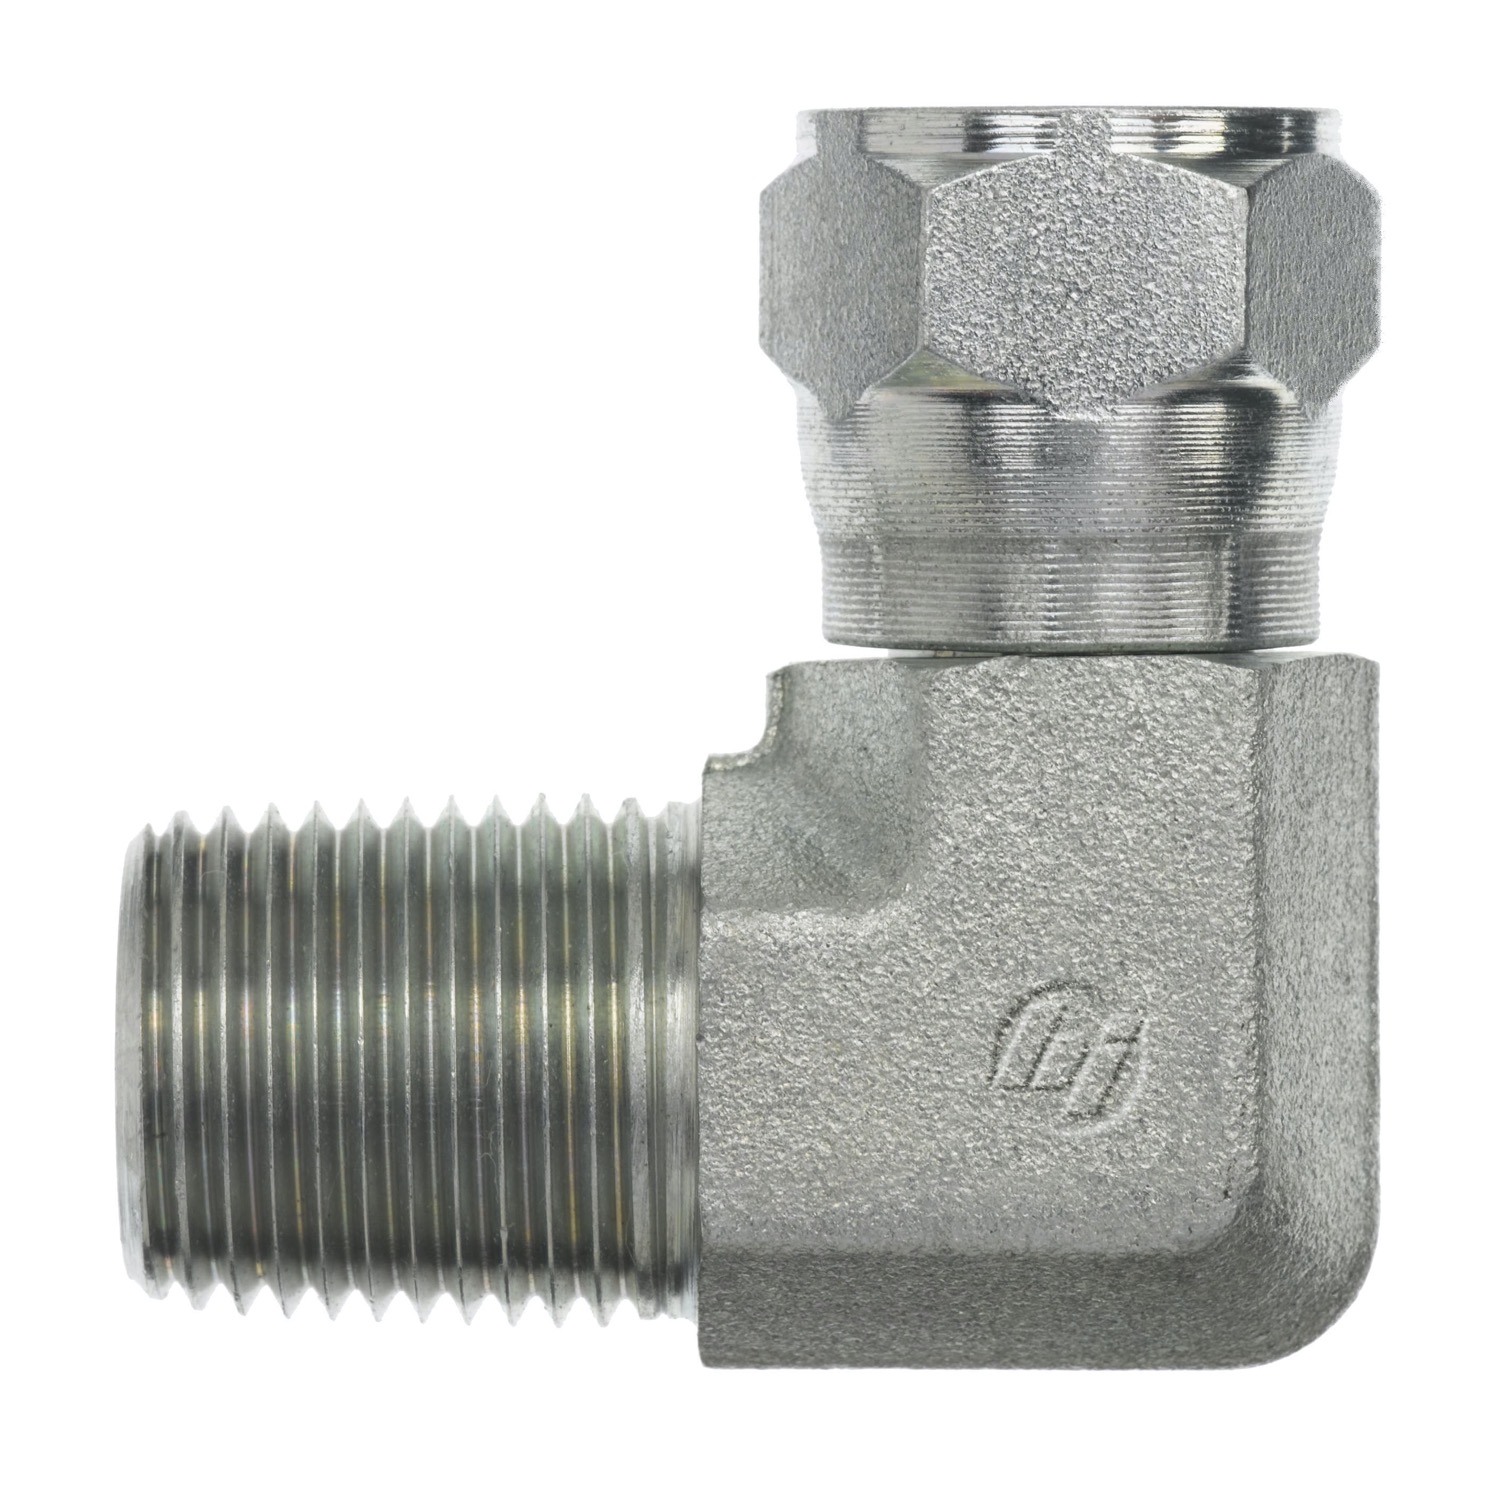 Hydraulic Hose Adapters - Elbow 90° Fitting, JIC 37° Flare to JIC 37° Flare, 6500 Series